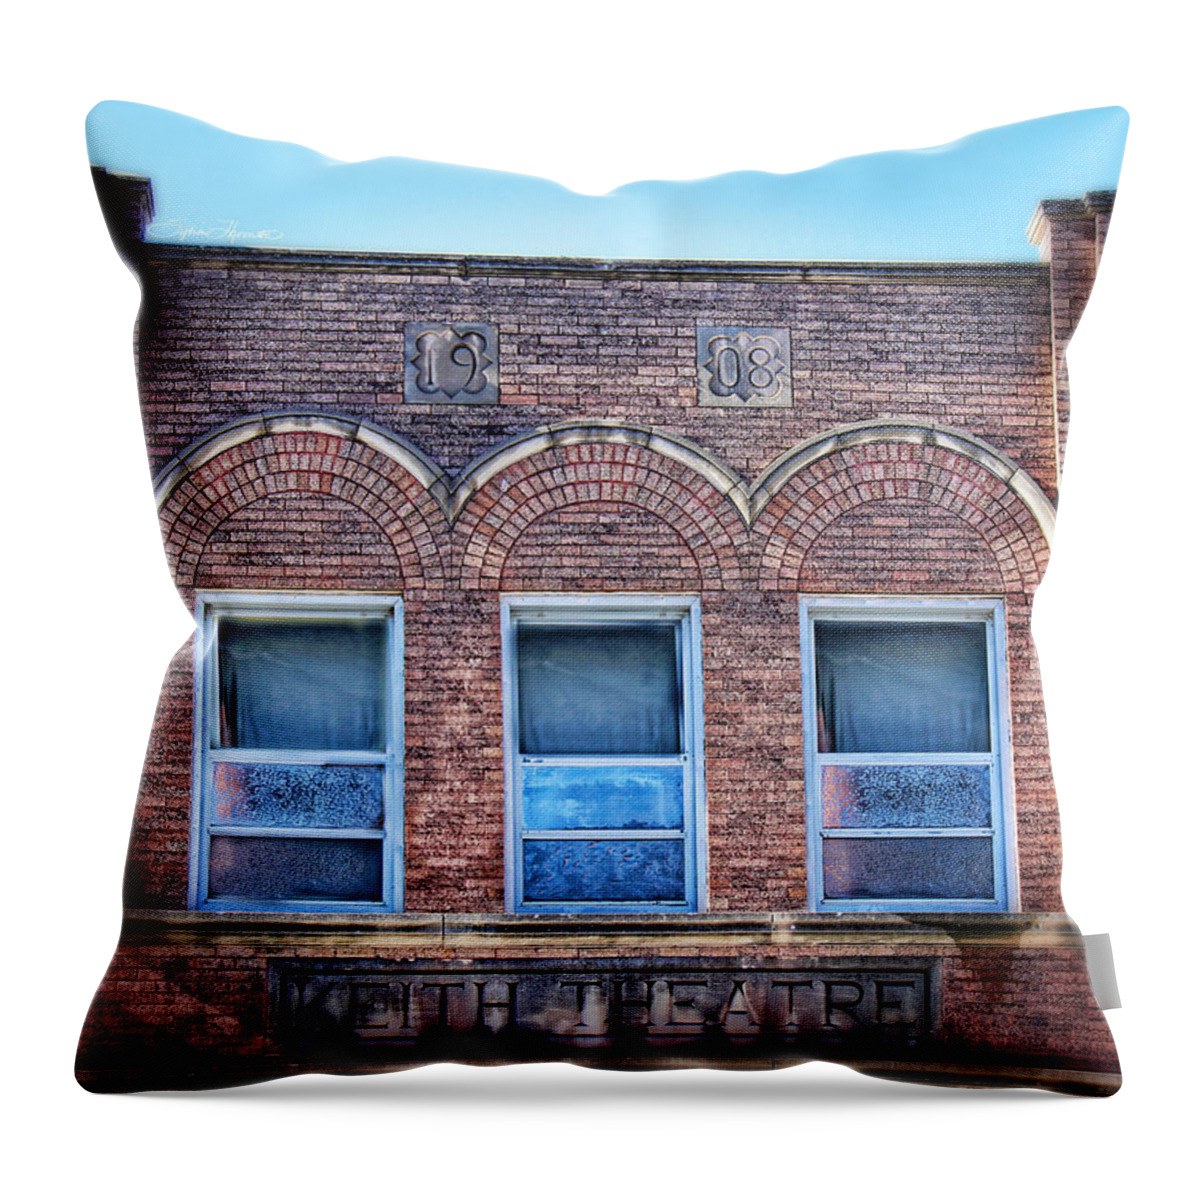 Keith Theater Throw Pillow featuring the photograph Keith Theater by Sylvia Thornton